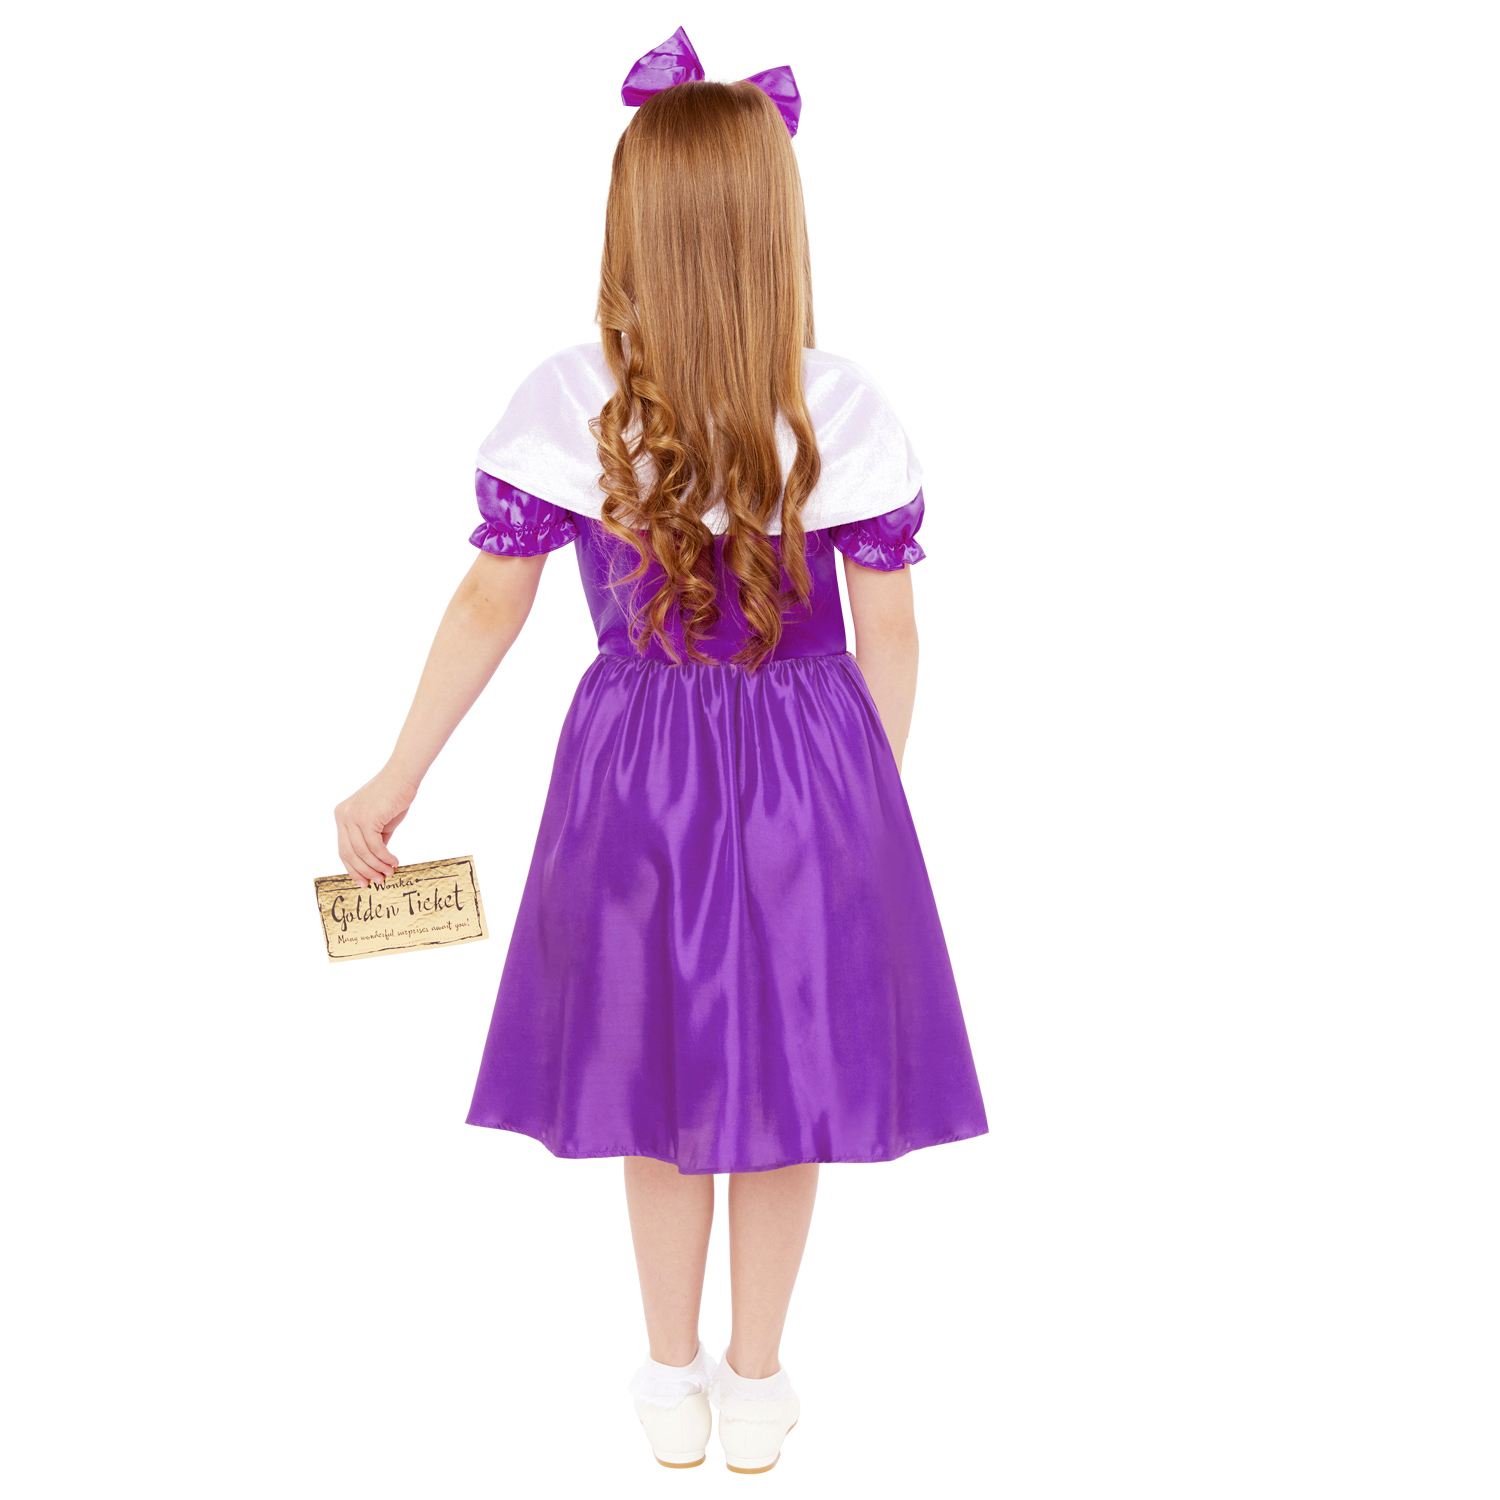 veruca salt costume a must have for any willy wonka fan 6595063e758f3.jpg